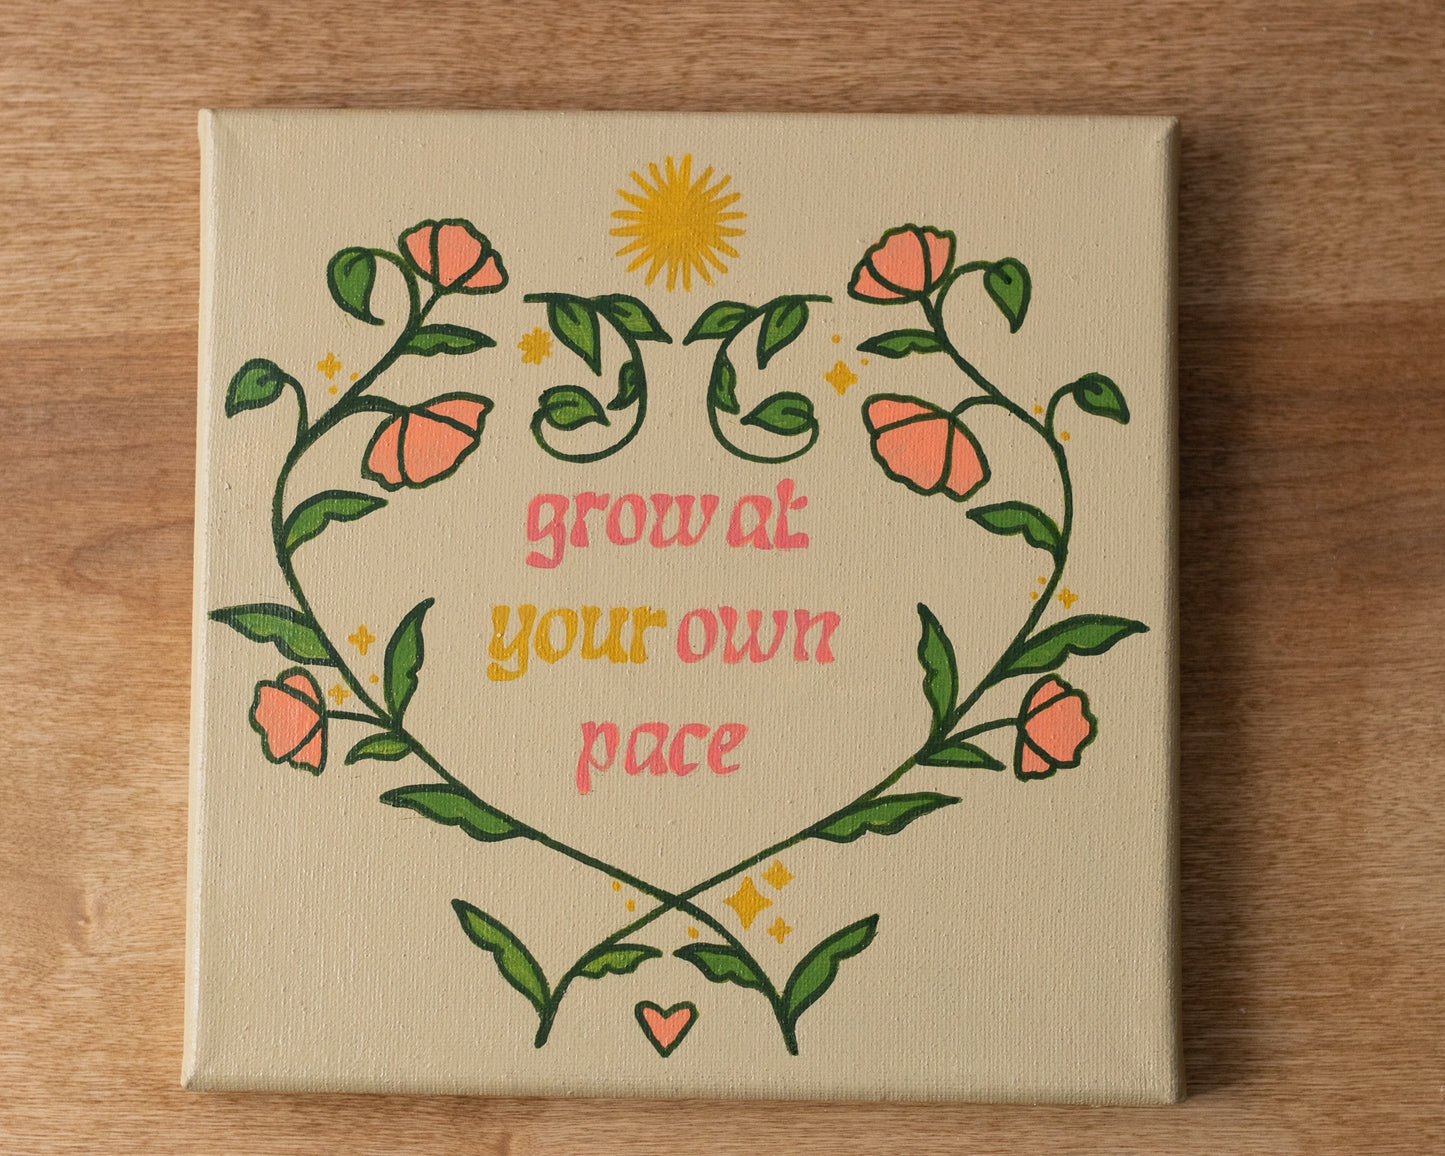 8 x 8 Original Painting - Grow at Your Own Pace